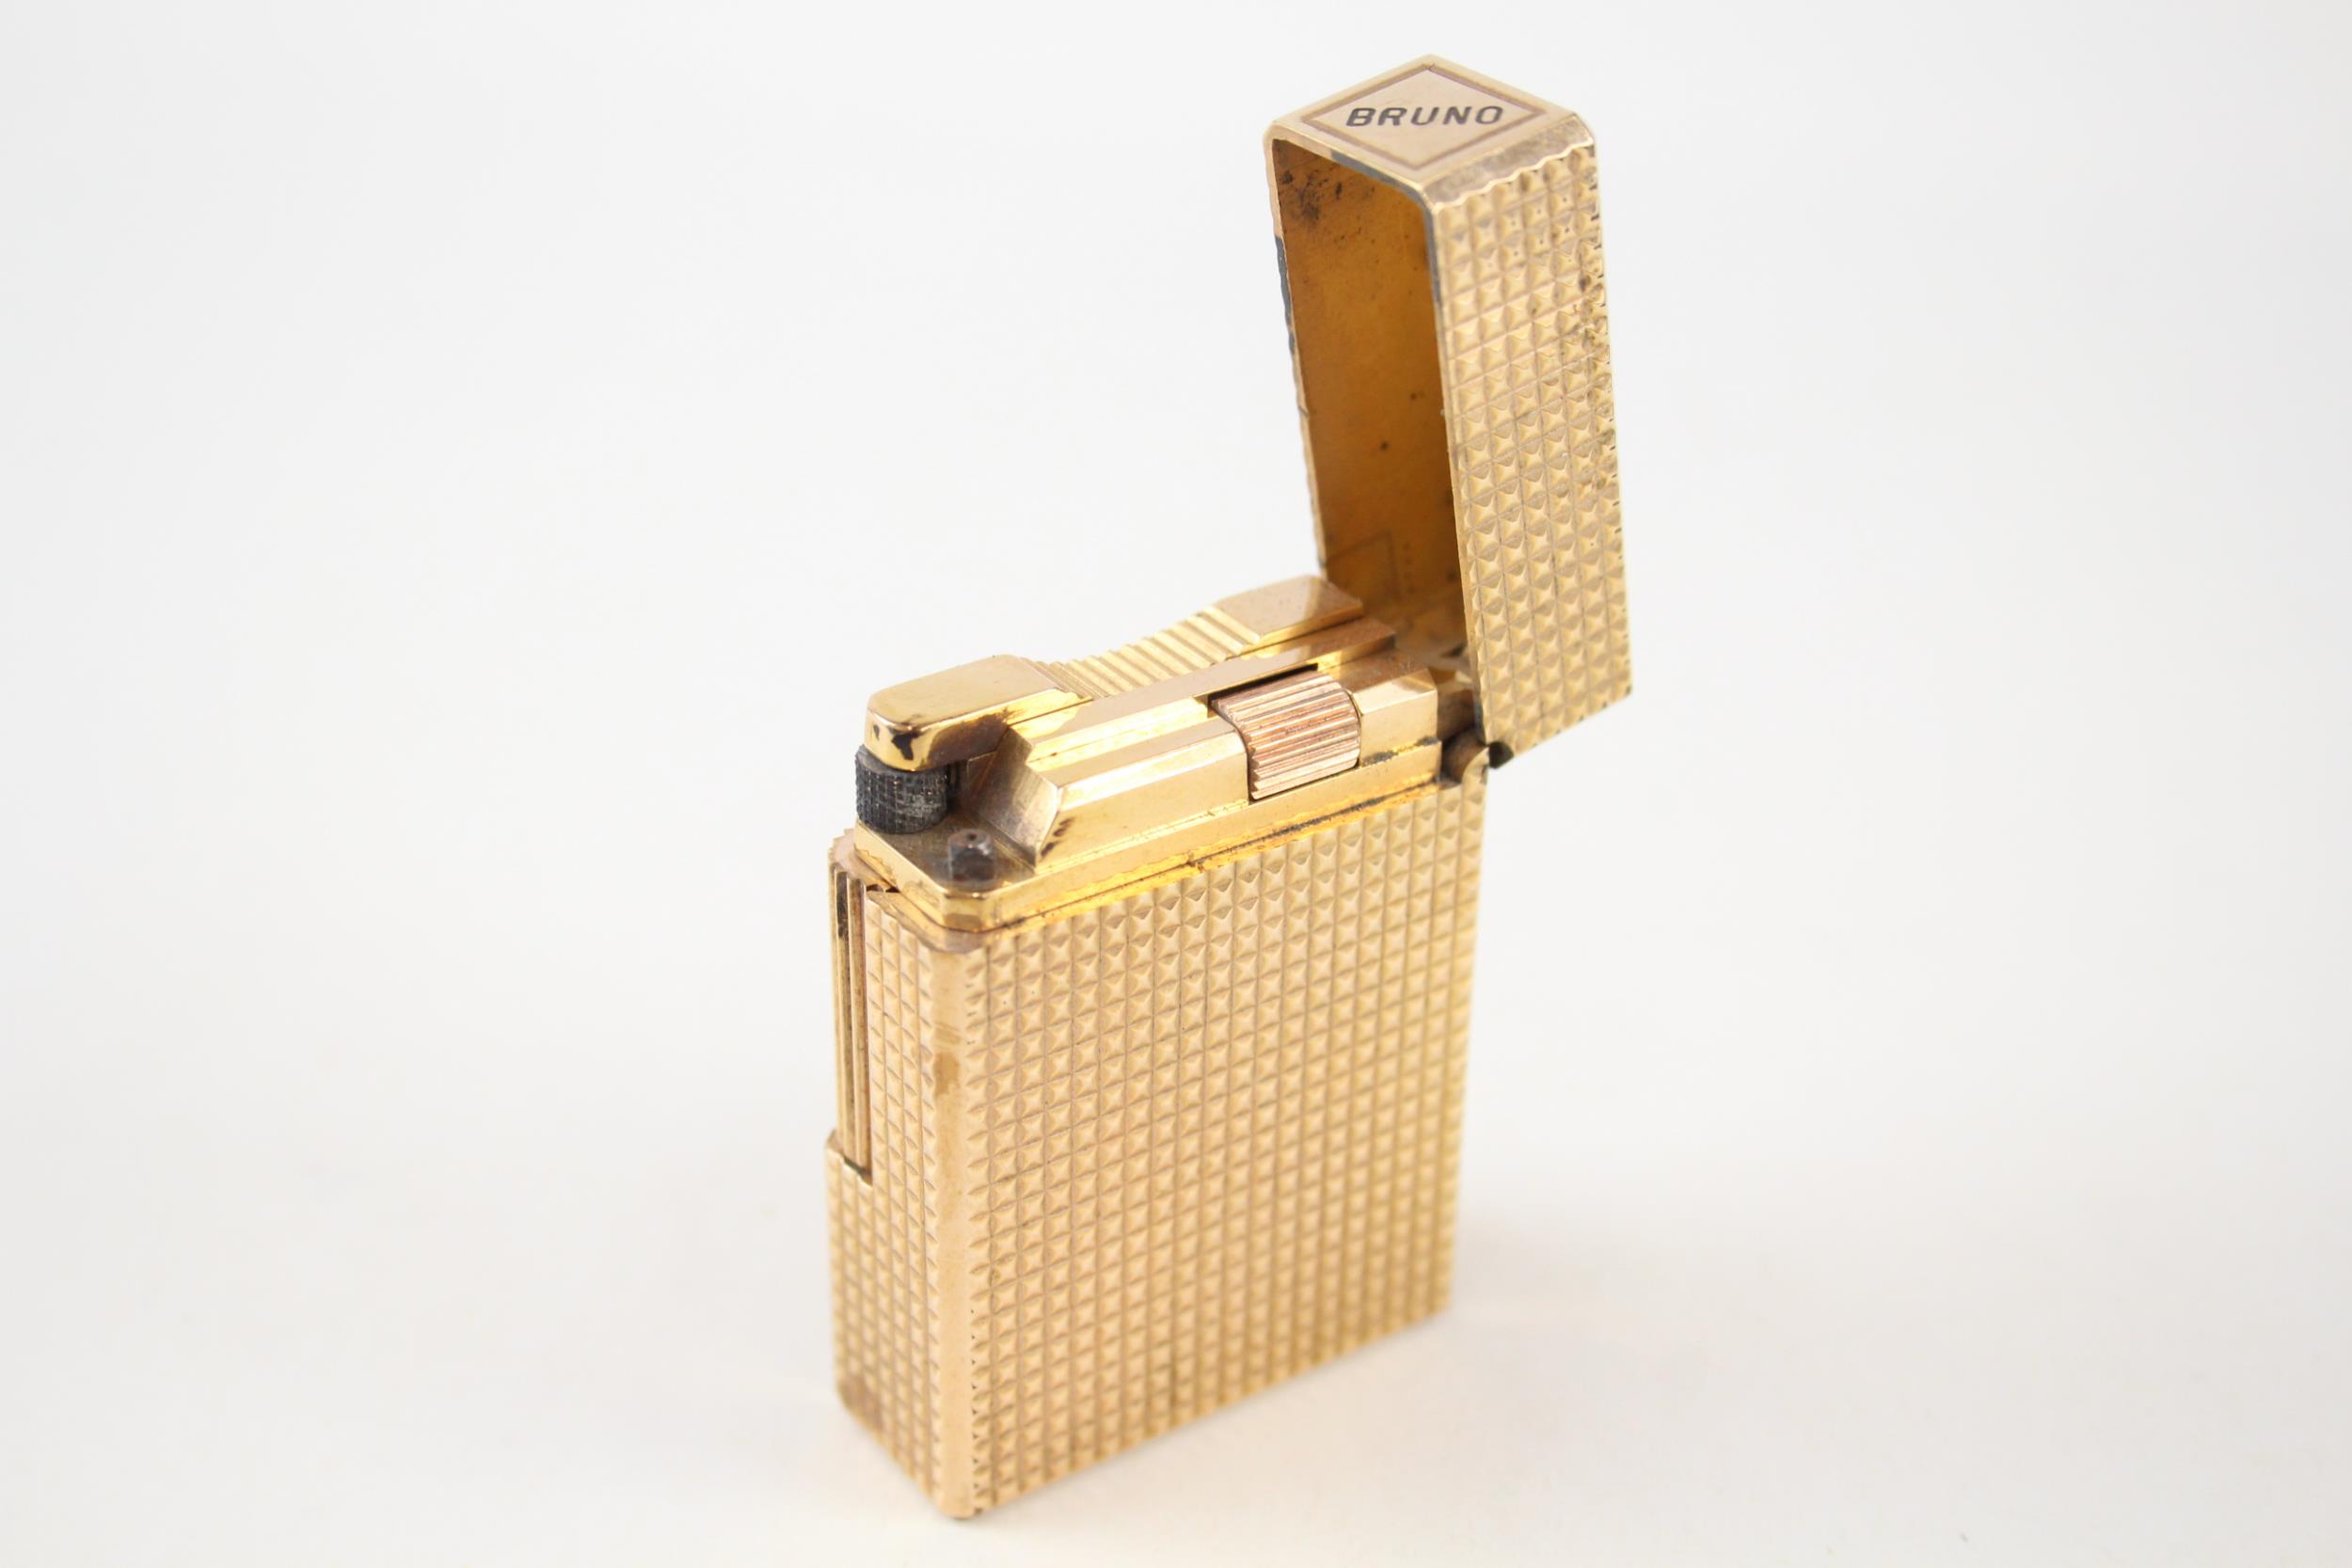 S.T DUPONT Paris Gold Plated Cigarette Lighter - J4RN15 (91g) - UNTESTED In previously owned - Image 3 of 4